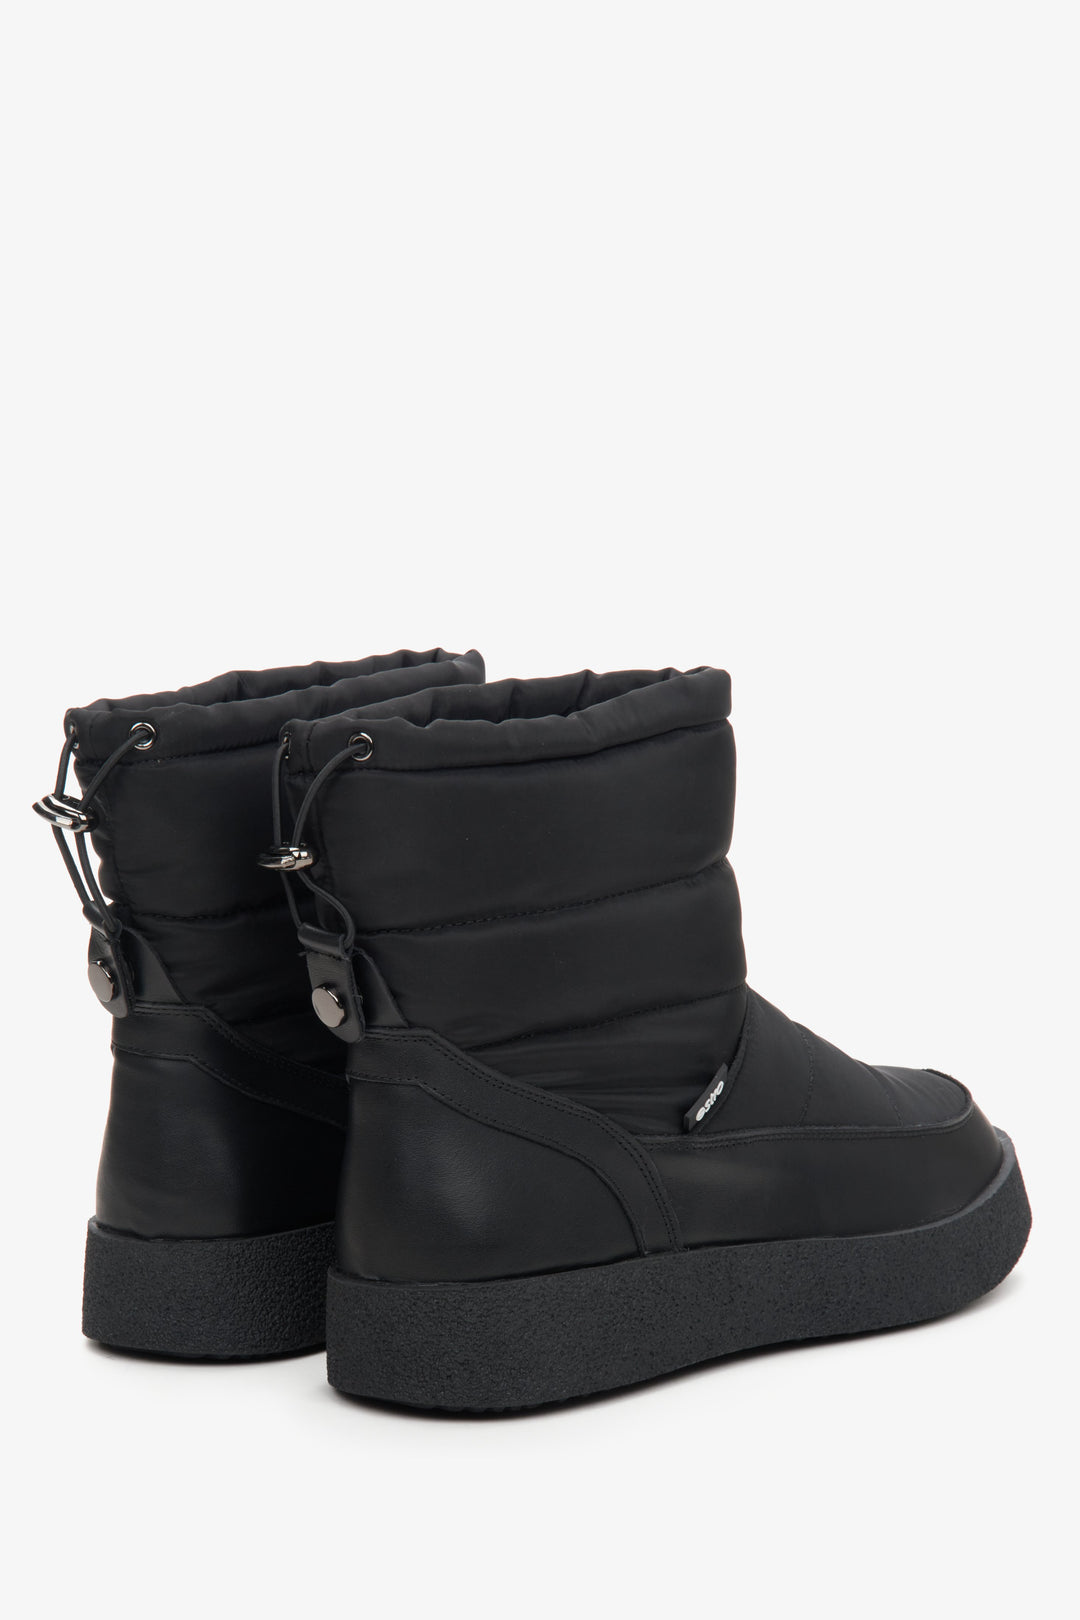 Women's black snow boots made of genuine leather and fur - close-up on the side line and heel.